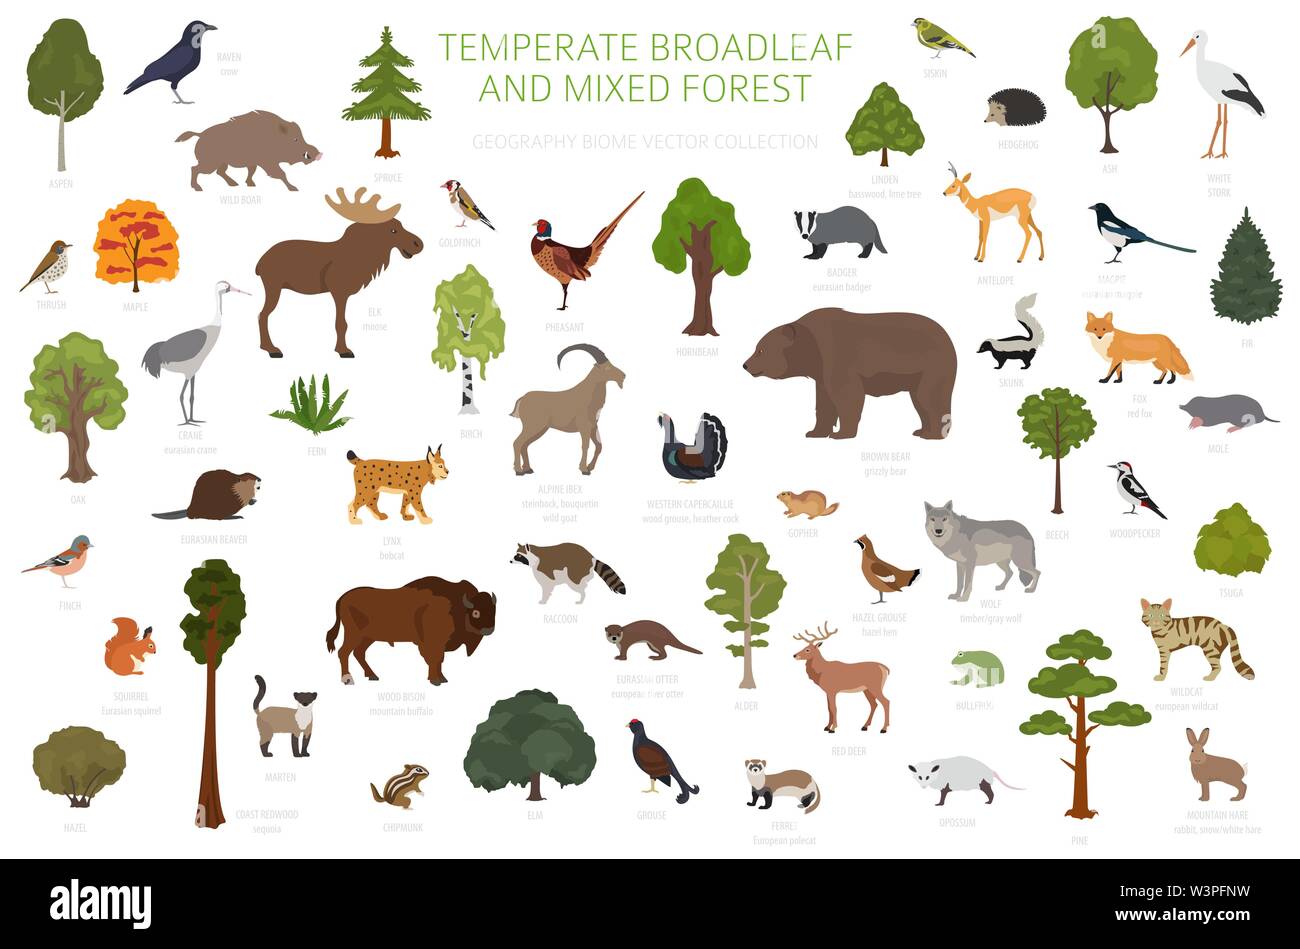 Temperate broadleaf forest and mixed forest biome. Terrestrial ...